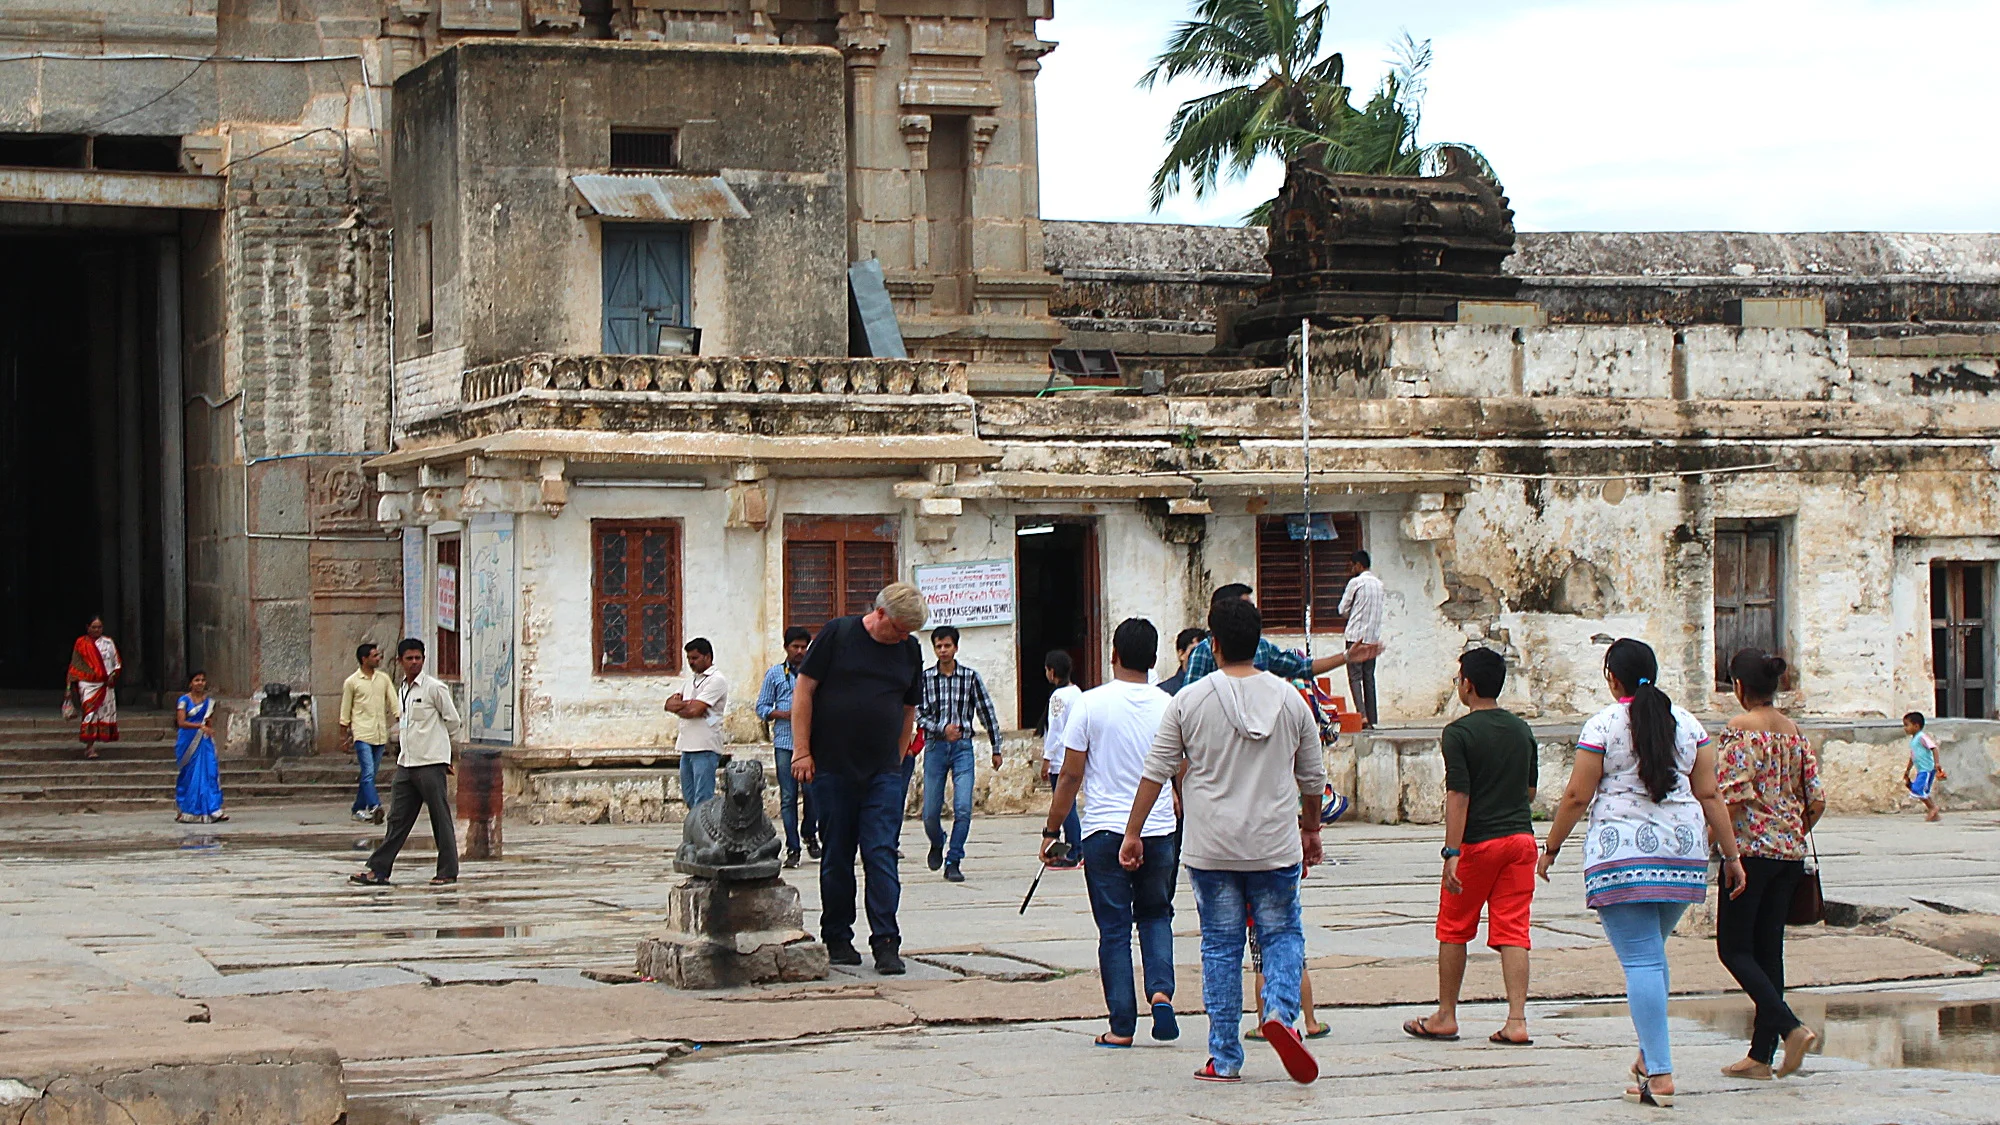 Tourists in the yard of the Virupaksha Temple.